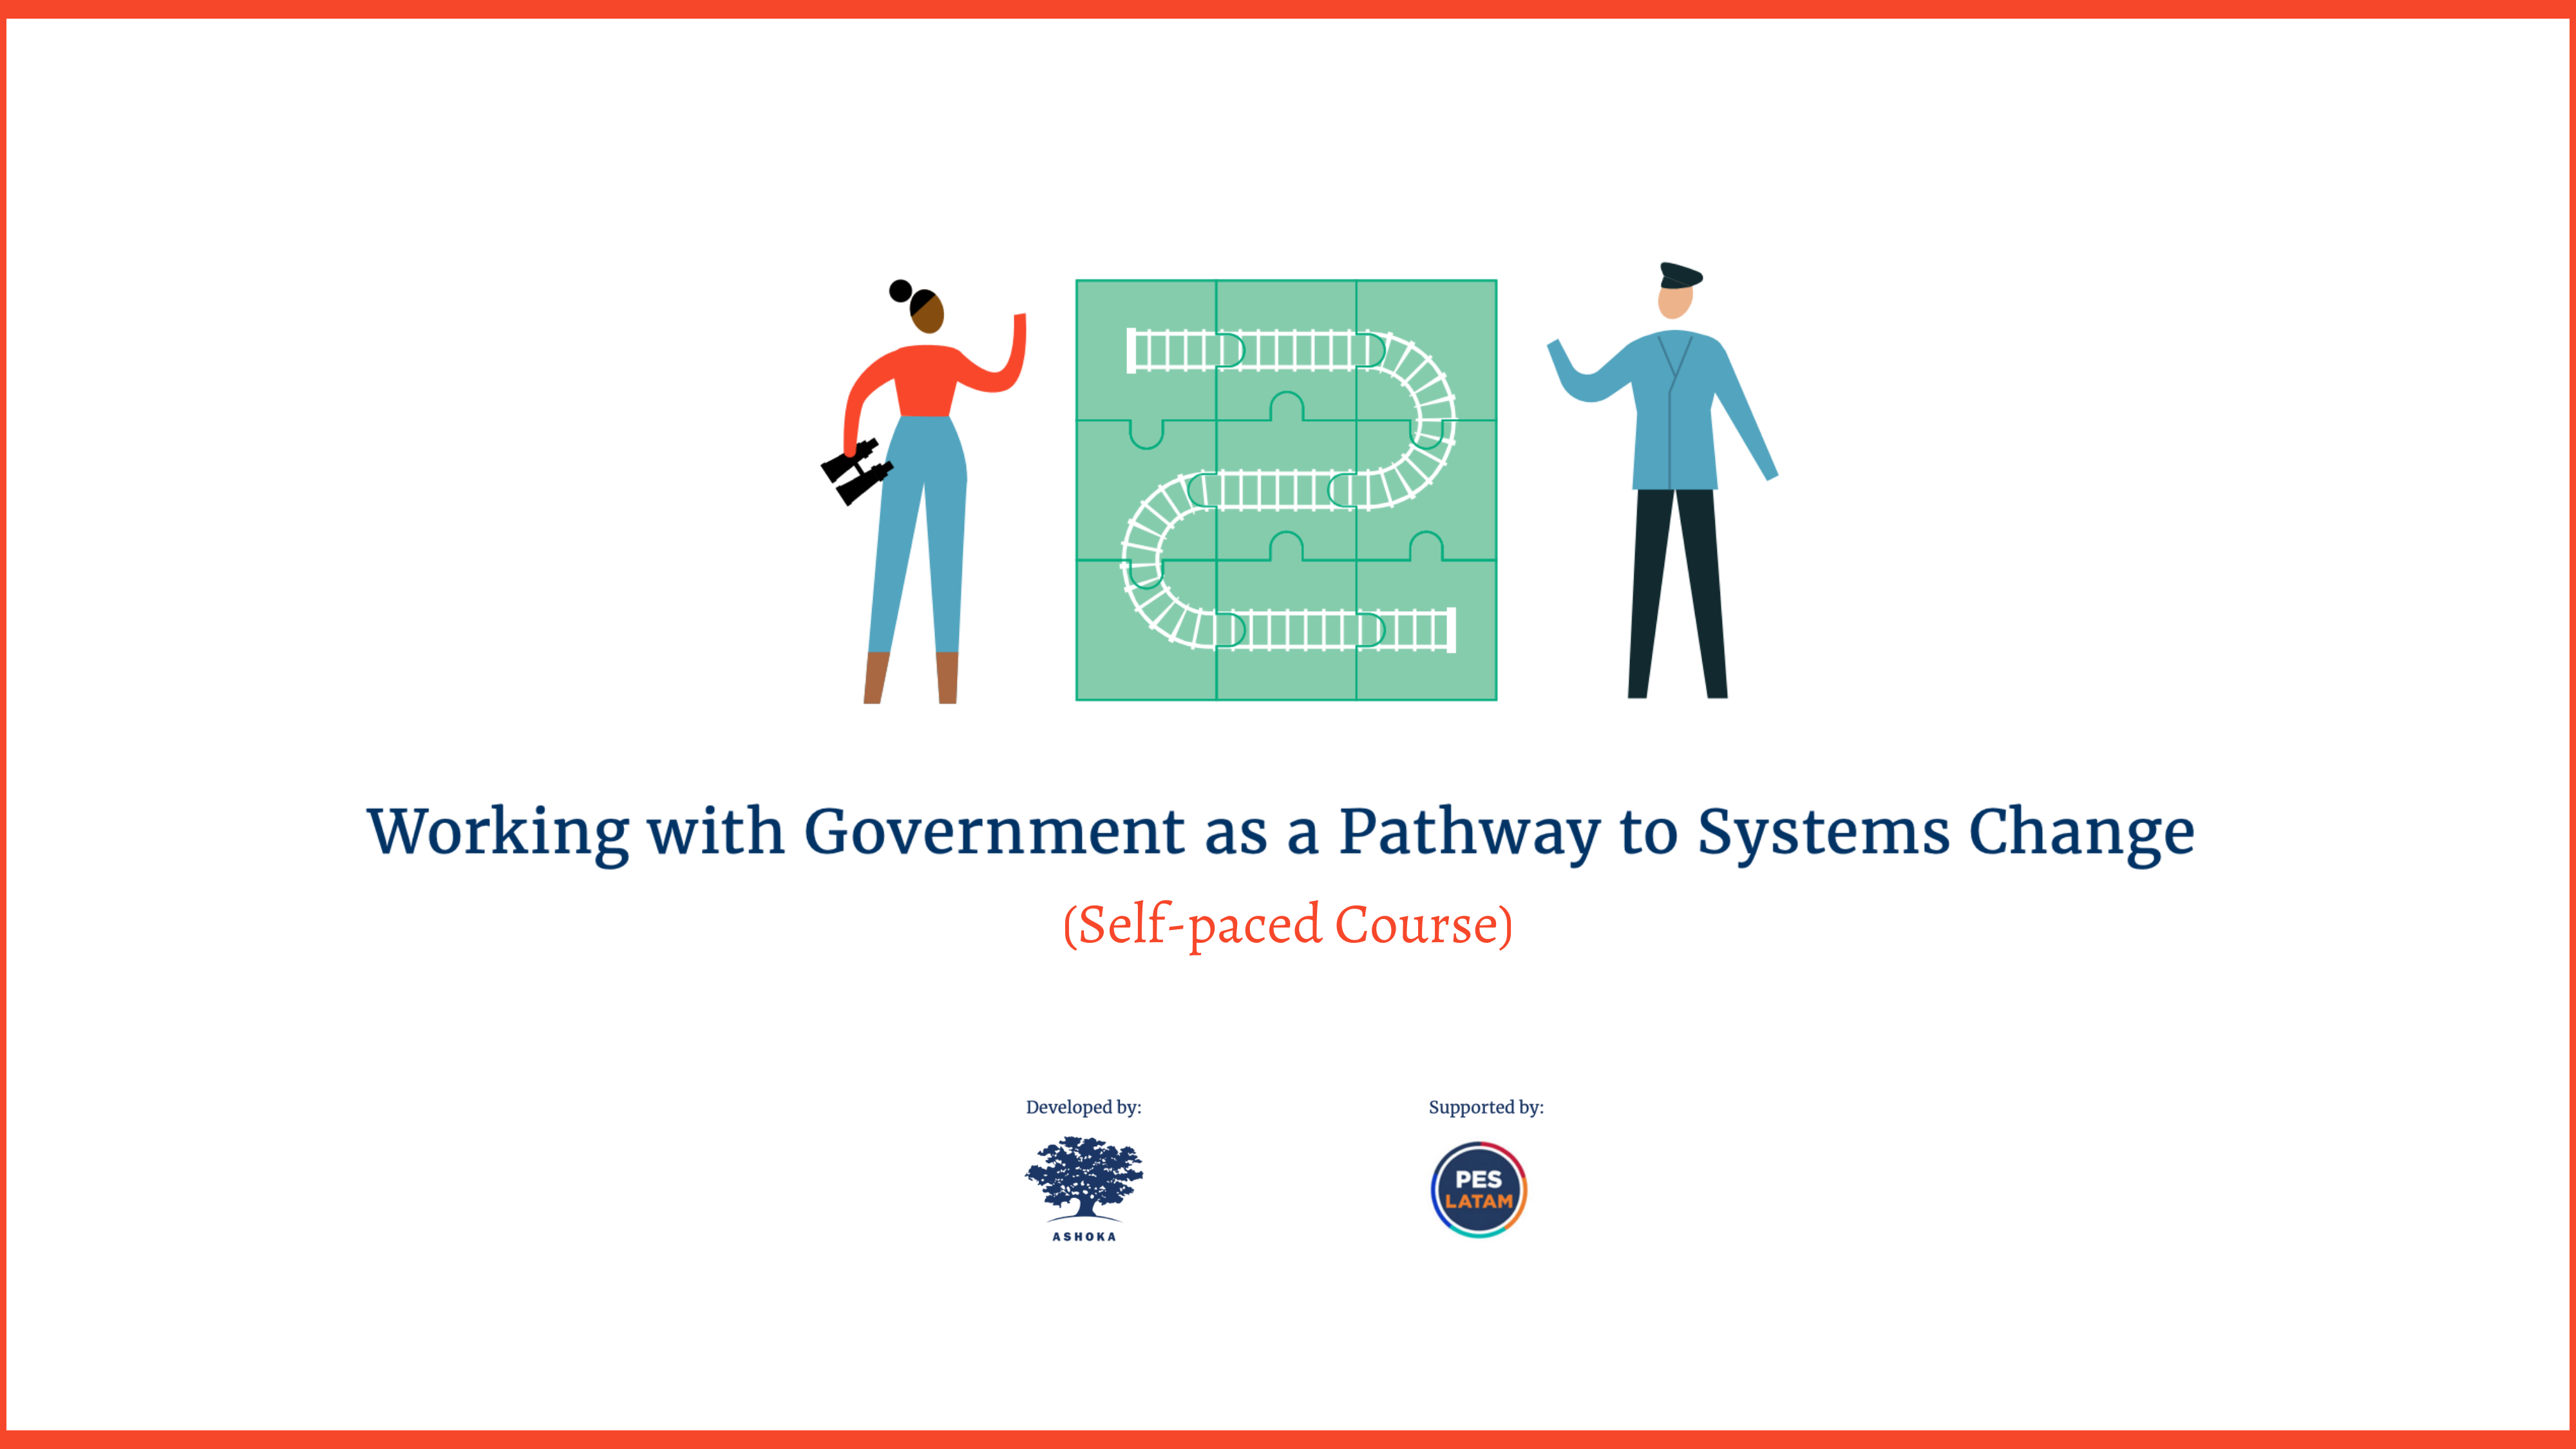 Working with Government as a Pathway to Systems Change